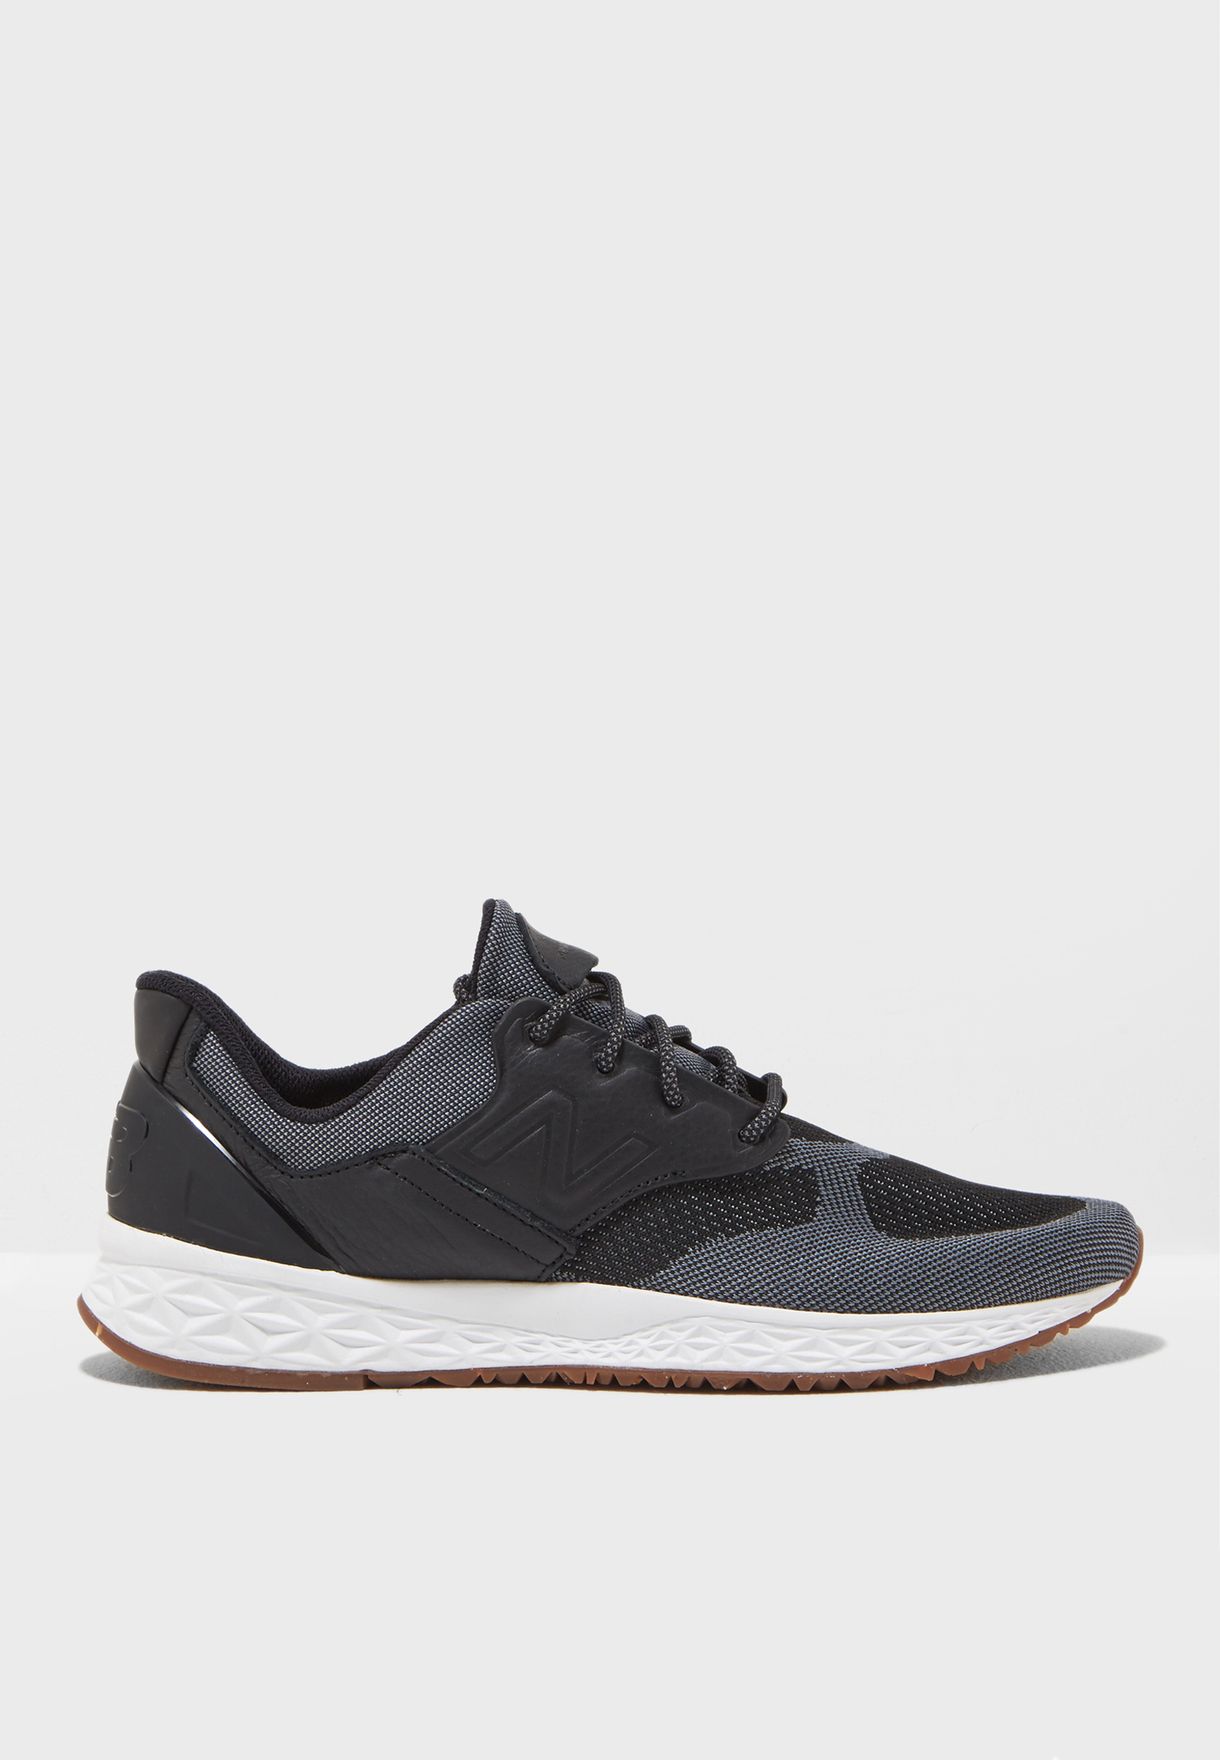 Note Creation Permission Buy New Balance black 100 for Men in MENA, Worldwide